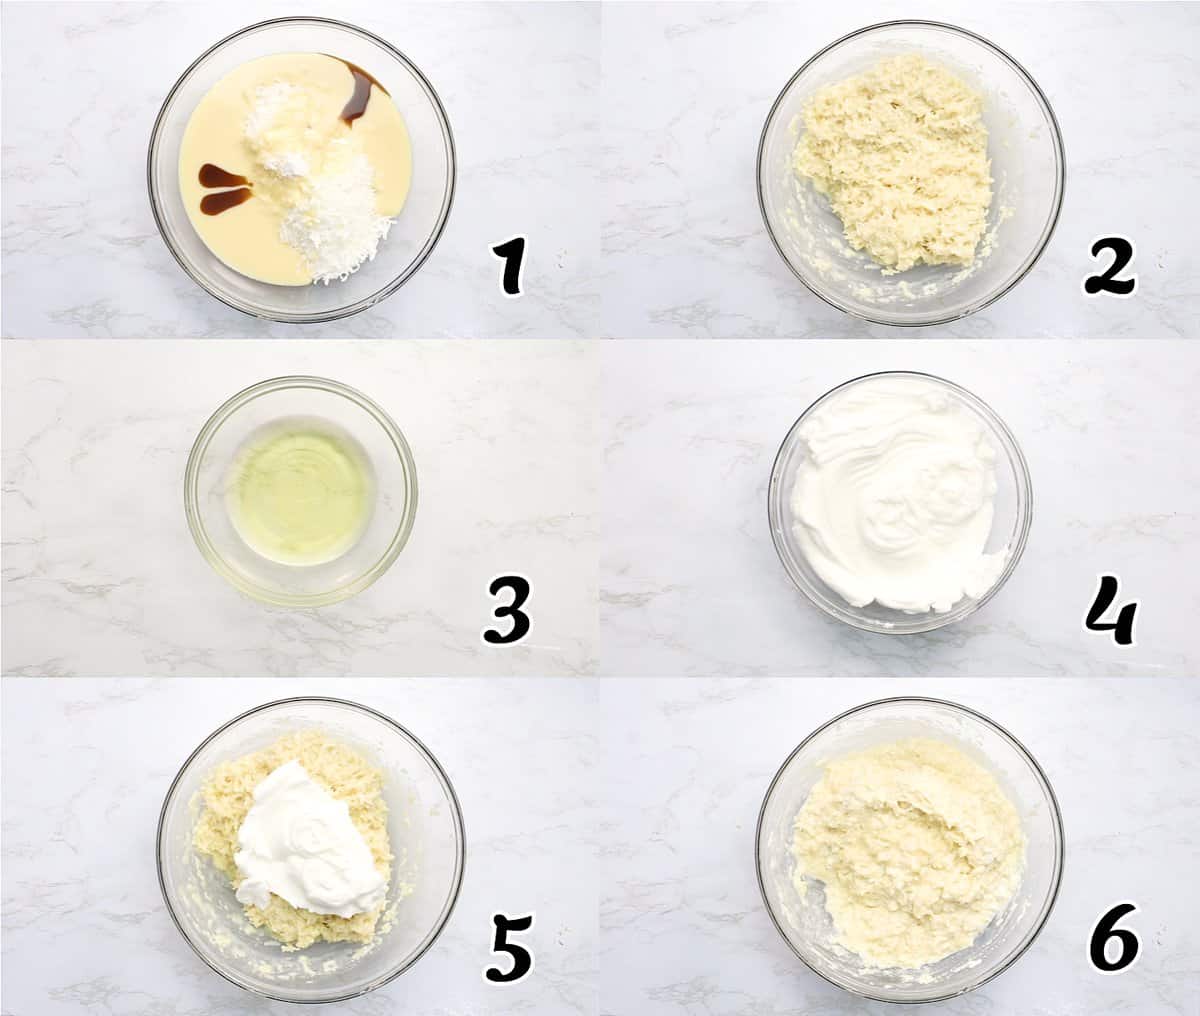 Mix the sweet ingredients, beat the egg whites, and mix it all together.